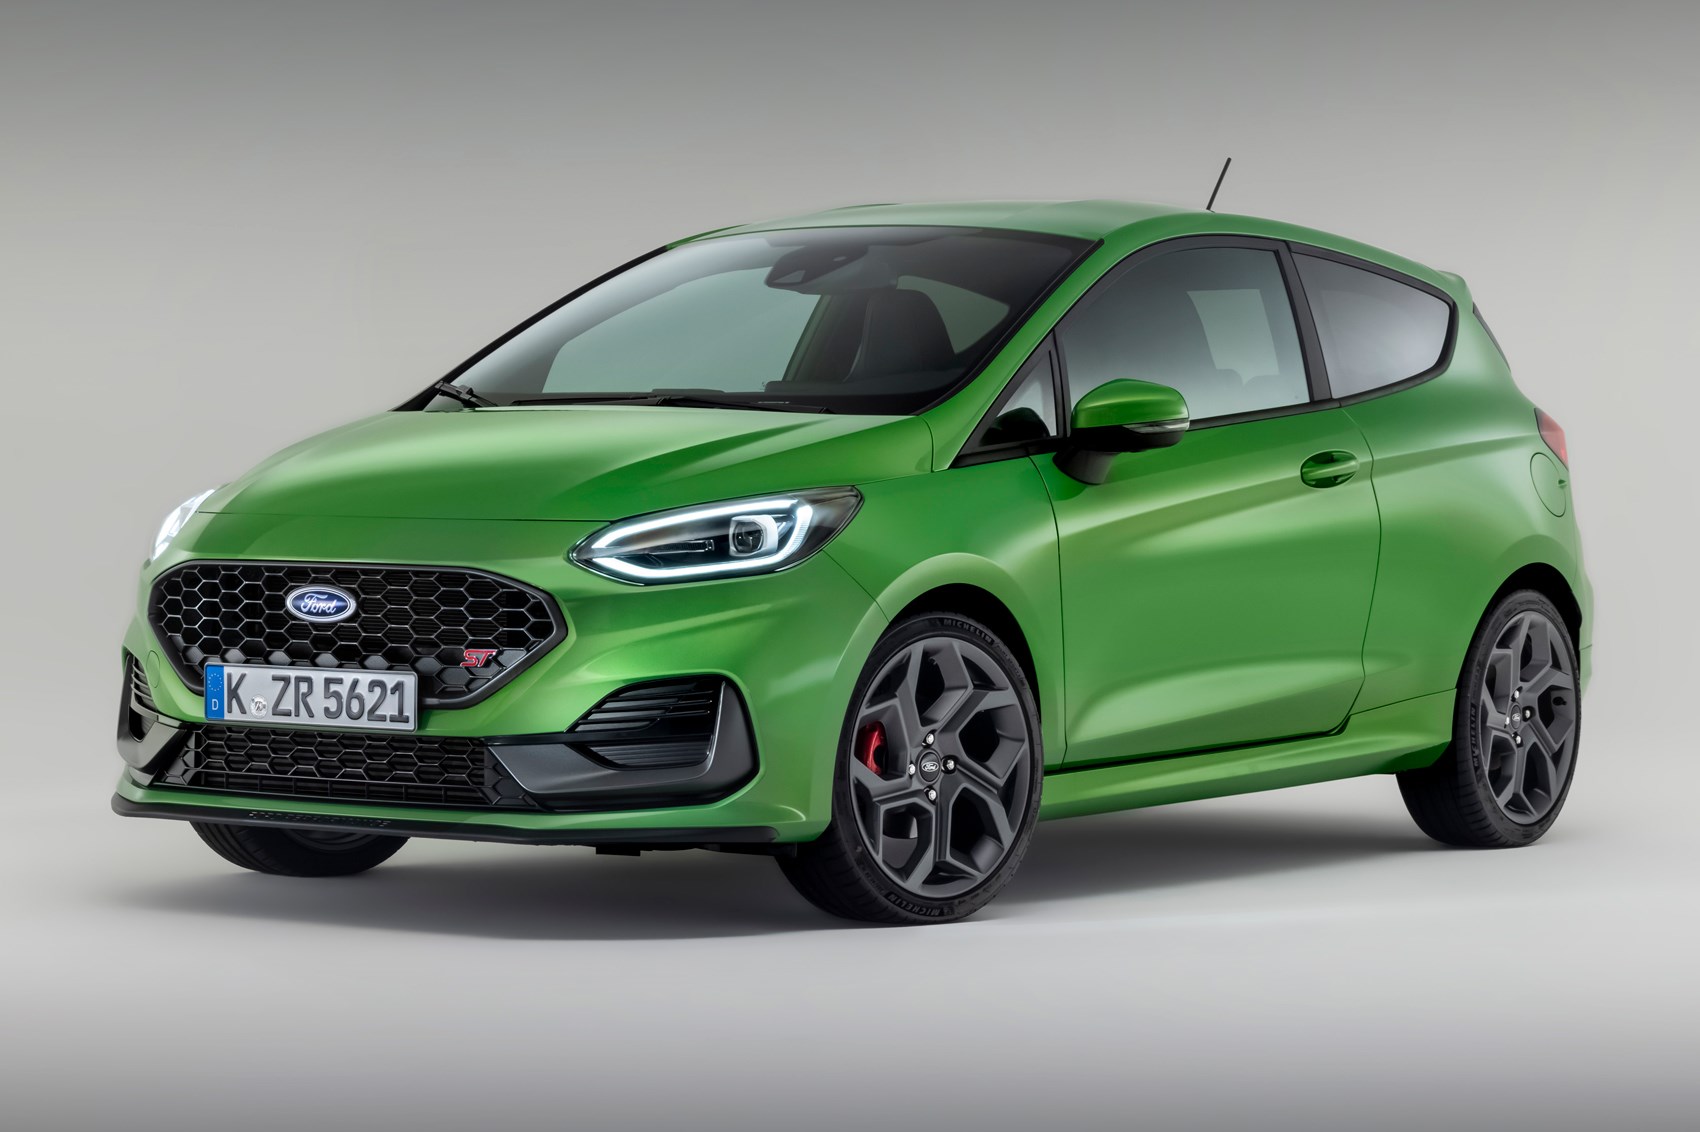 New Ford Fiesta: 2021 facelift adds more tech and electrification